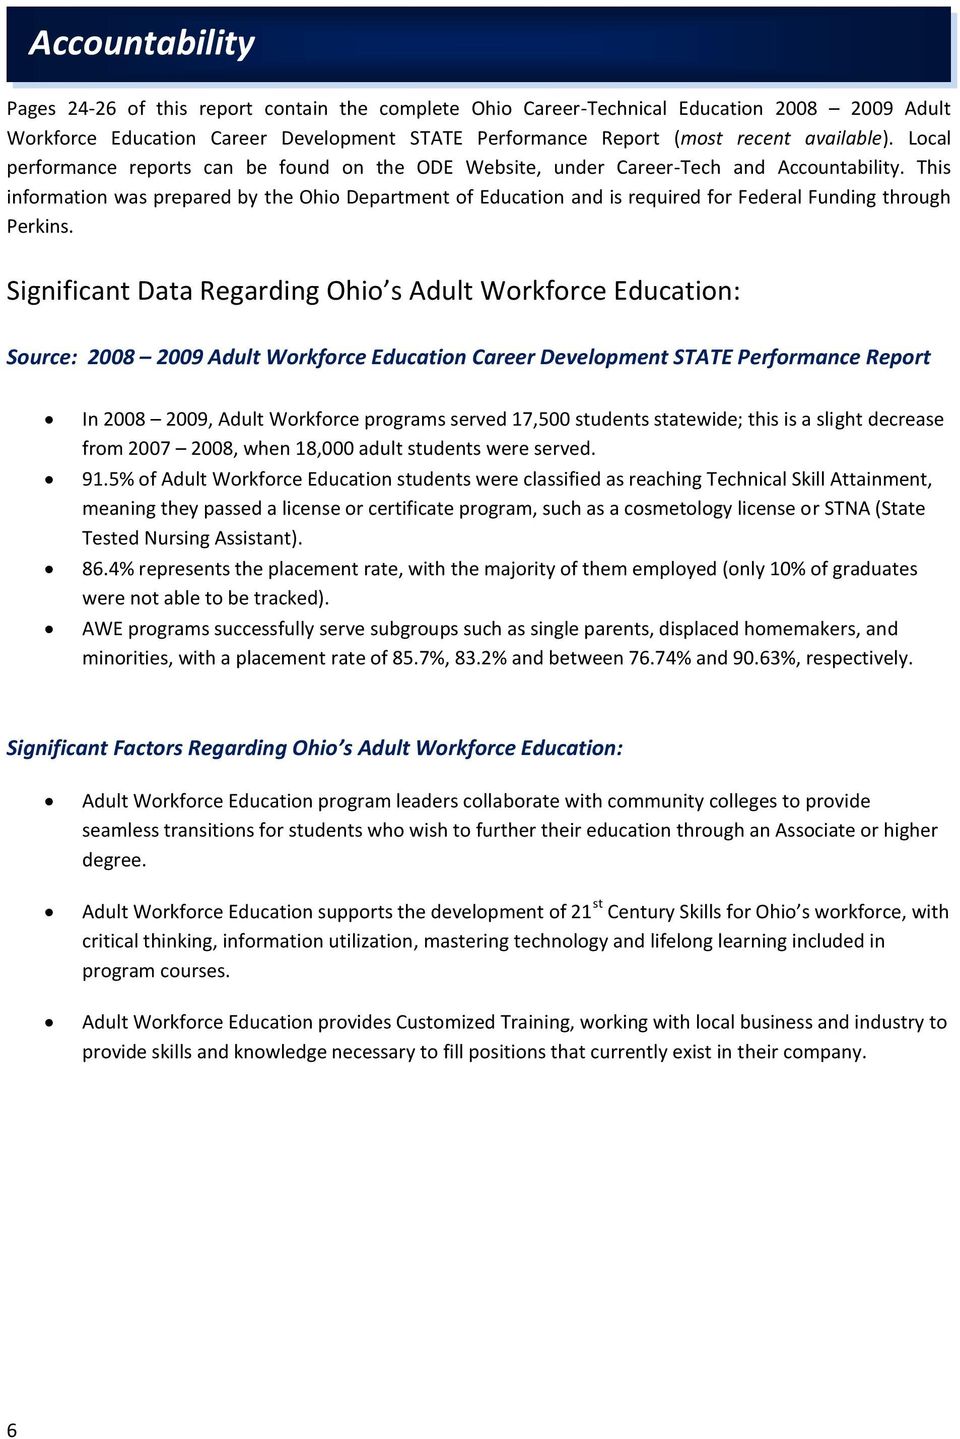 This information was prepared by the Ohio Department of Education and is required for Federal Funding through Perkins.